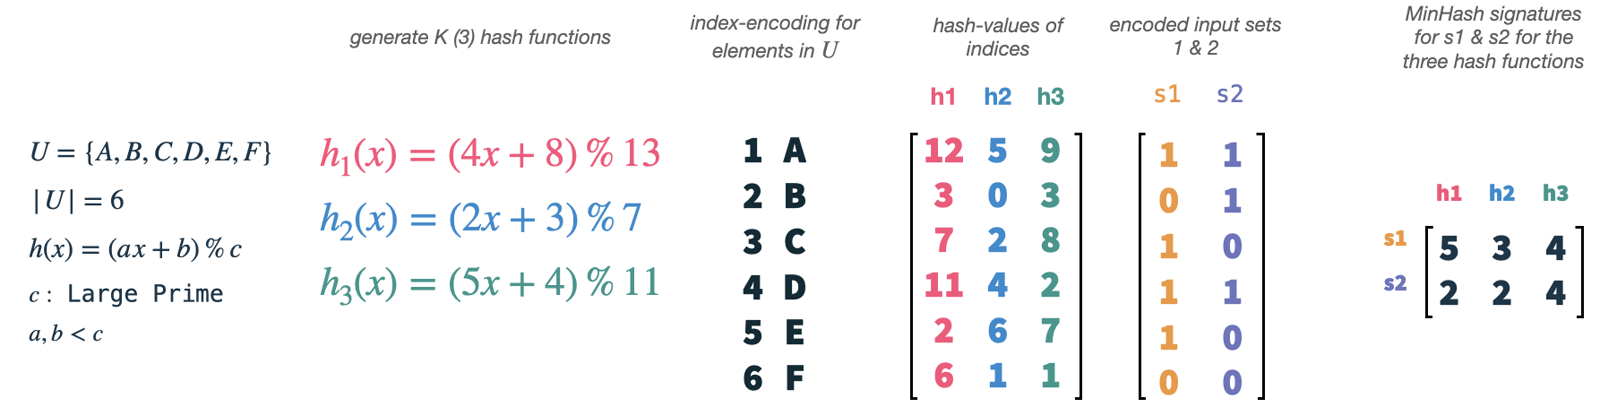 MinHashing is a technique from the locality-sensitive hashing family. It uses multiple hashing functions to generate a hashing signature. The signatures of two sets collide with the probability of their Jaccard similarity. Image by author.